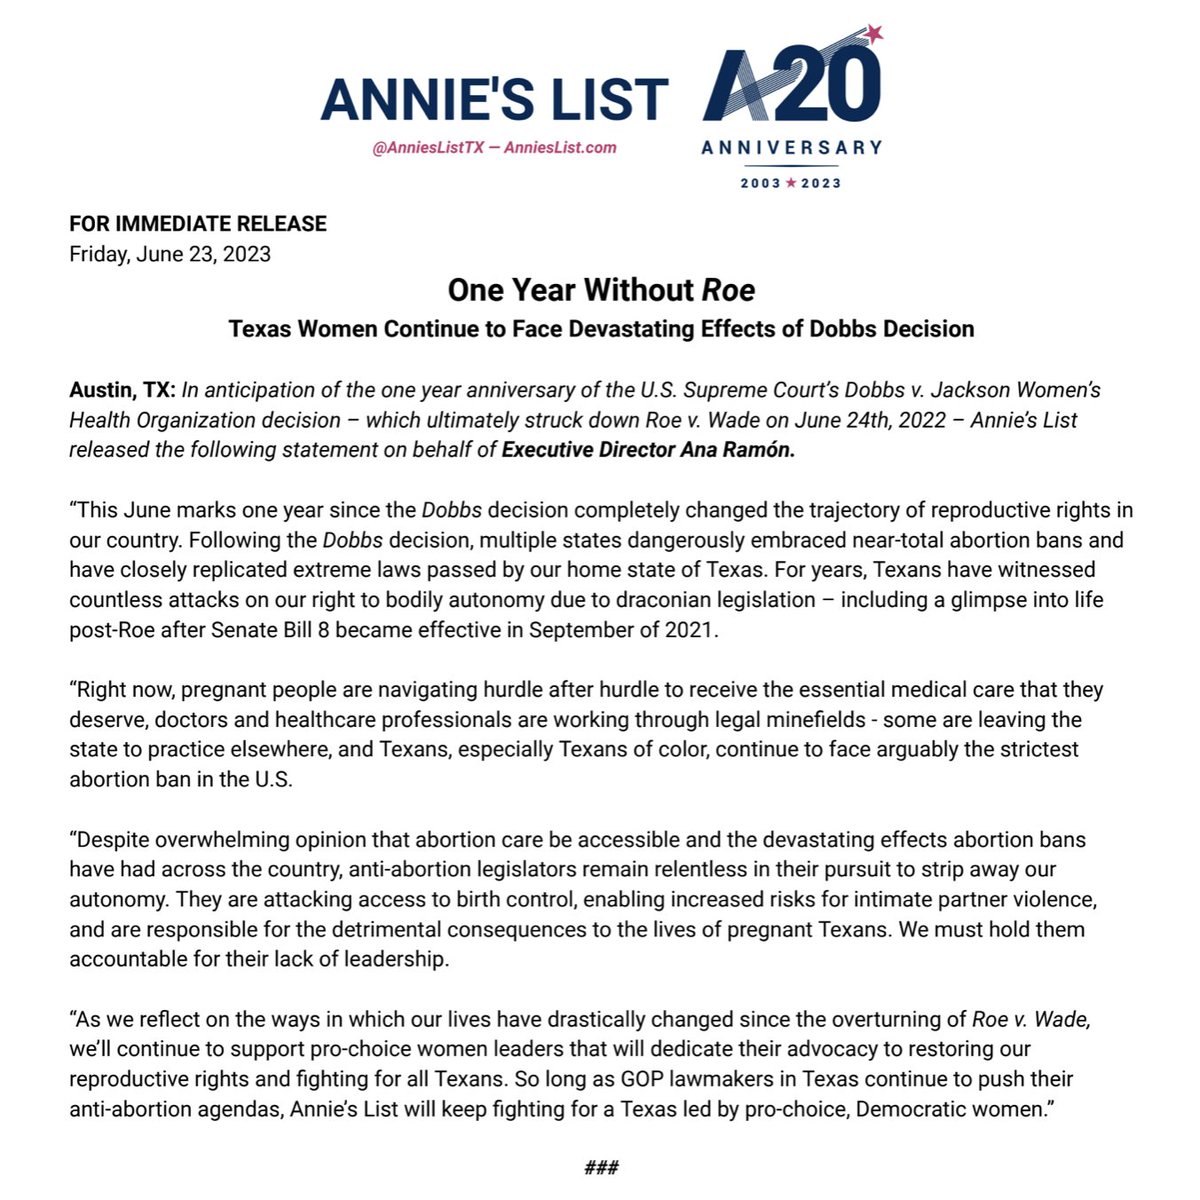 'So long as GOP lawmakers in Texas continue to push their anti-abortion agendas, Annie’s List will keep fighting for a Texas led by pro-choice, Democratic women.' - @Ana_Ramon89 #RoevWade